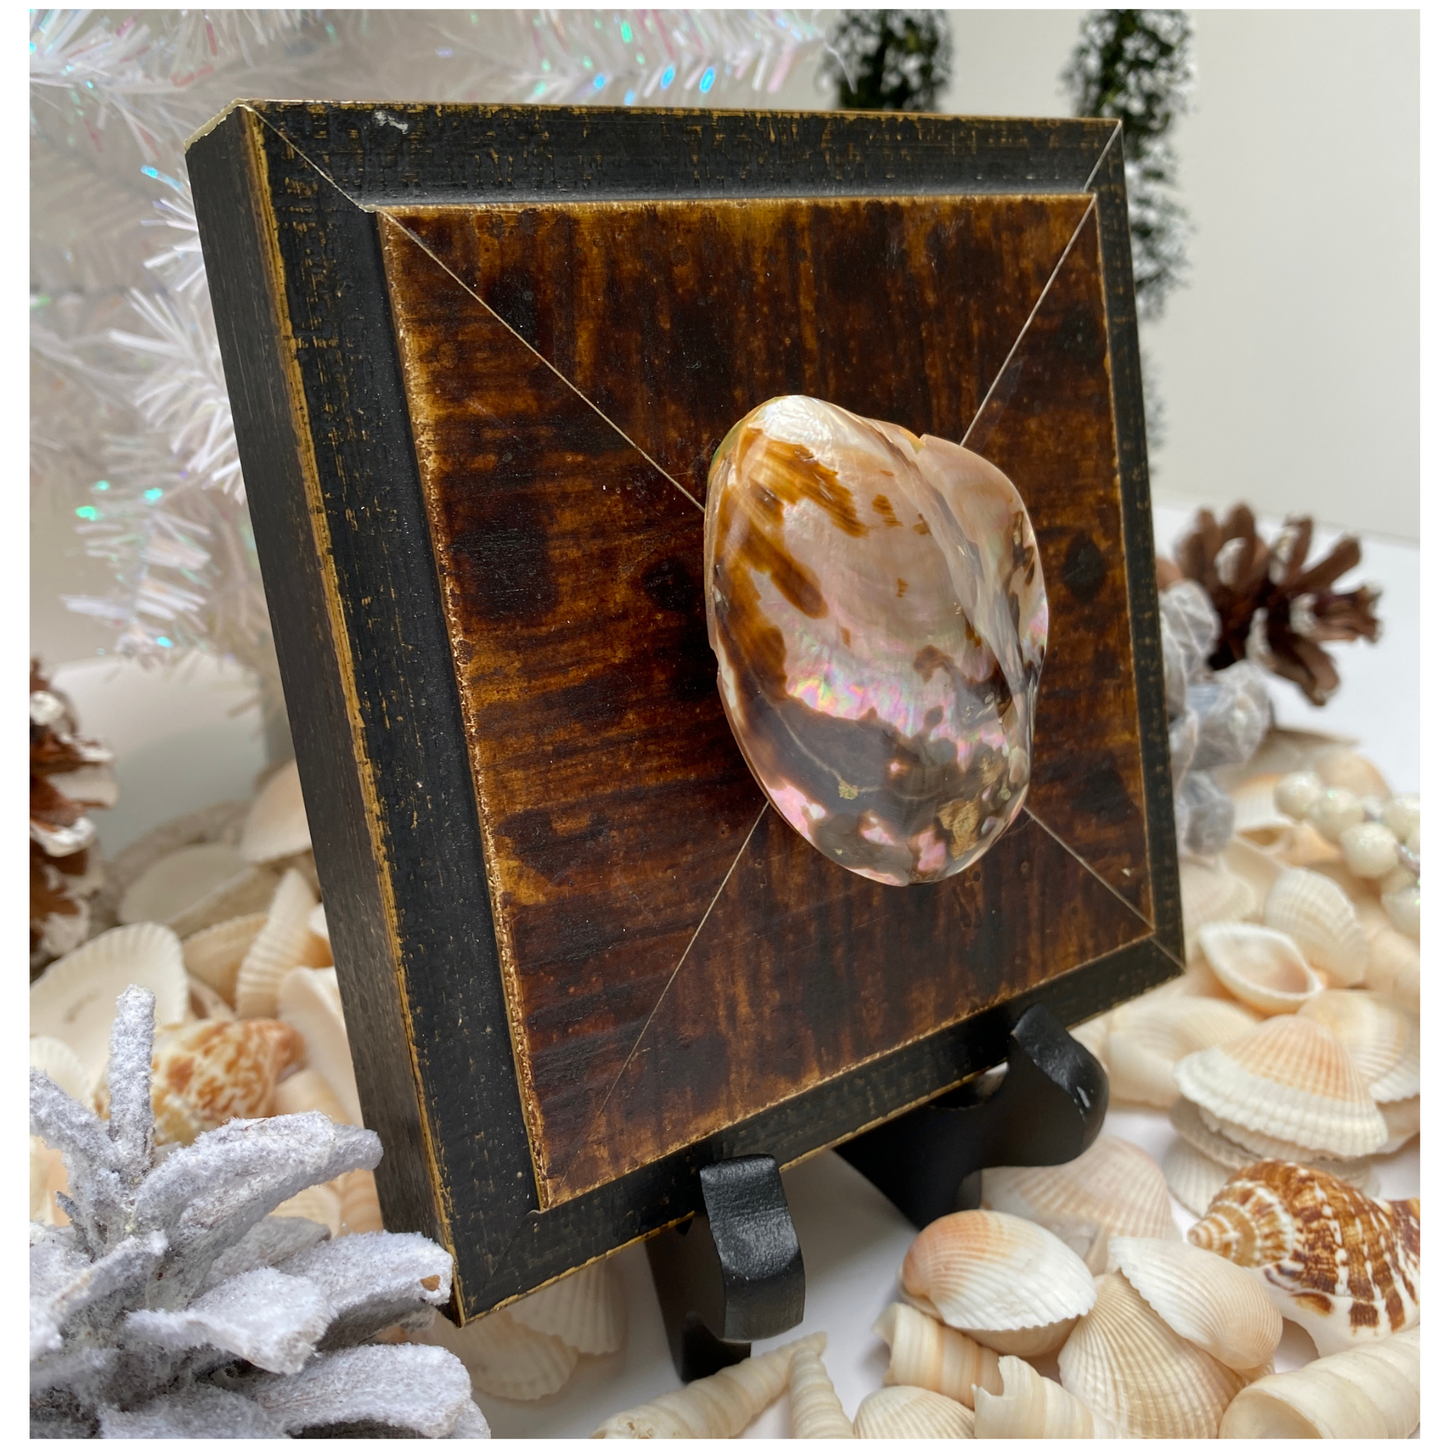 Seashell, Wooden Art, Handcrafted Home Decor